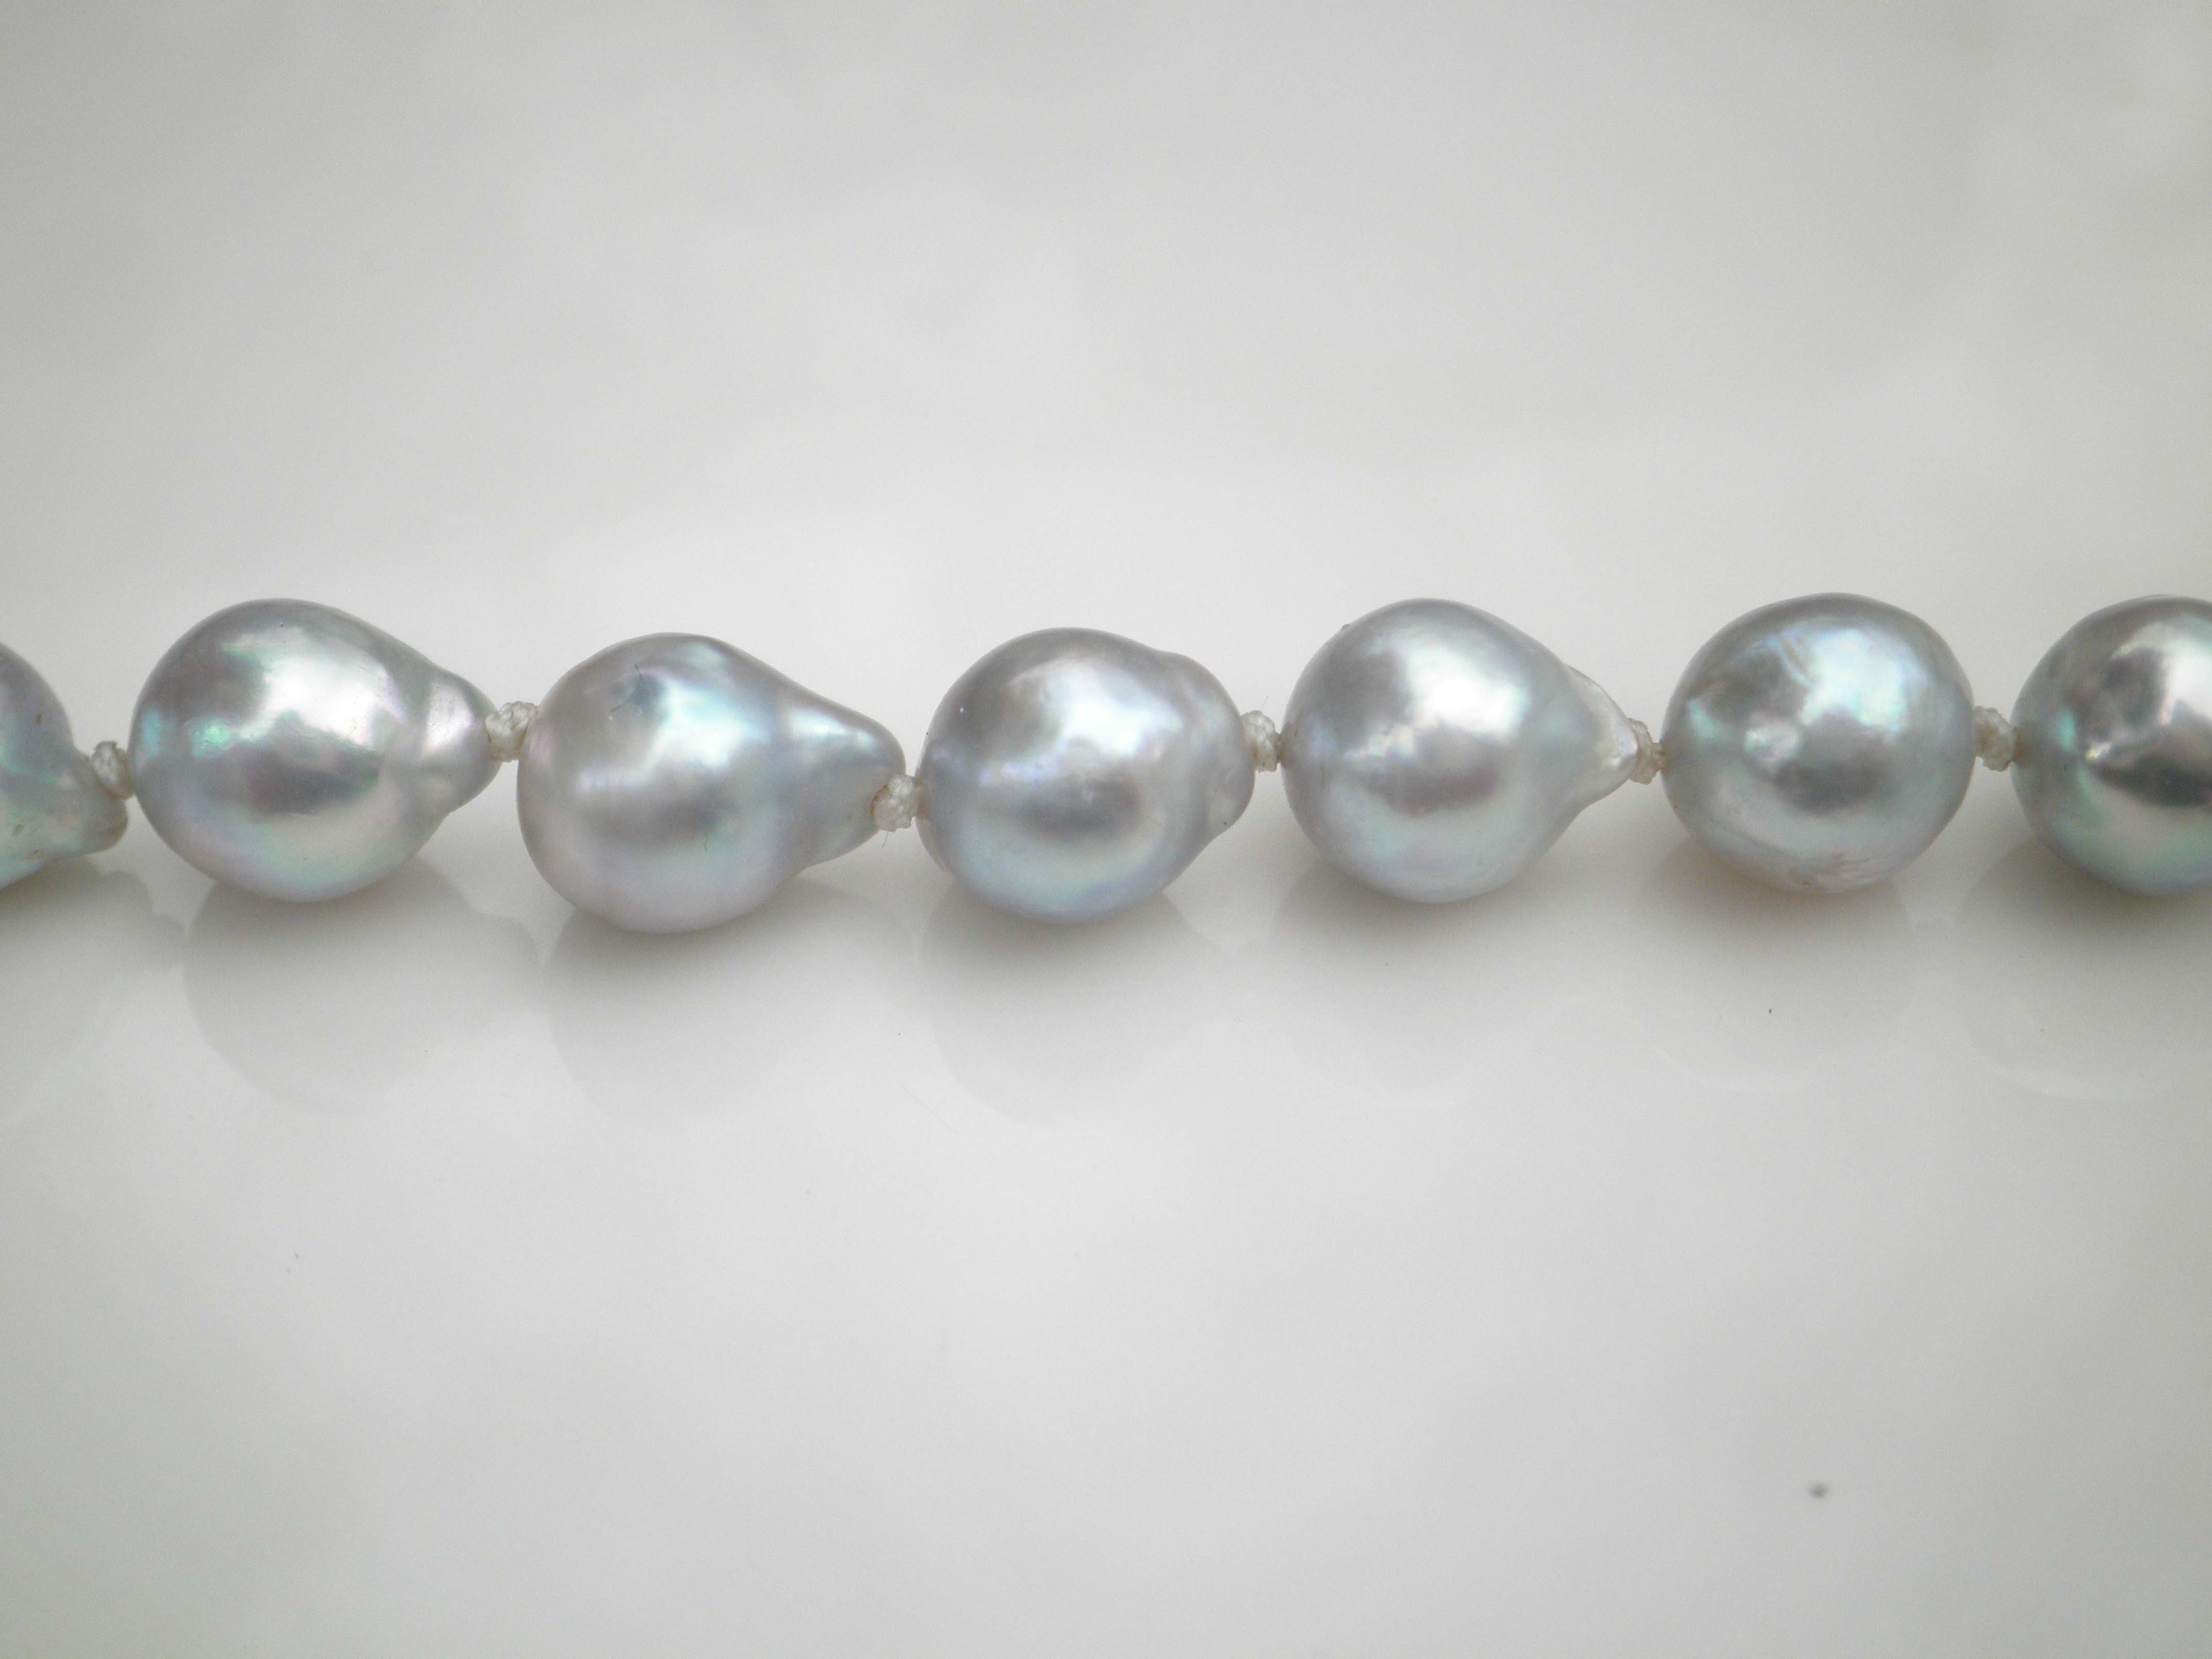 Are These Akoya Pearls?